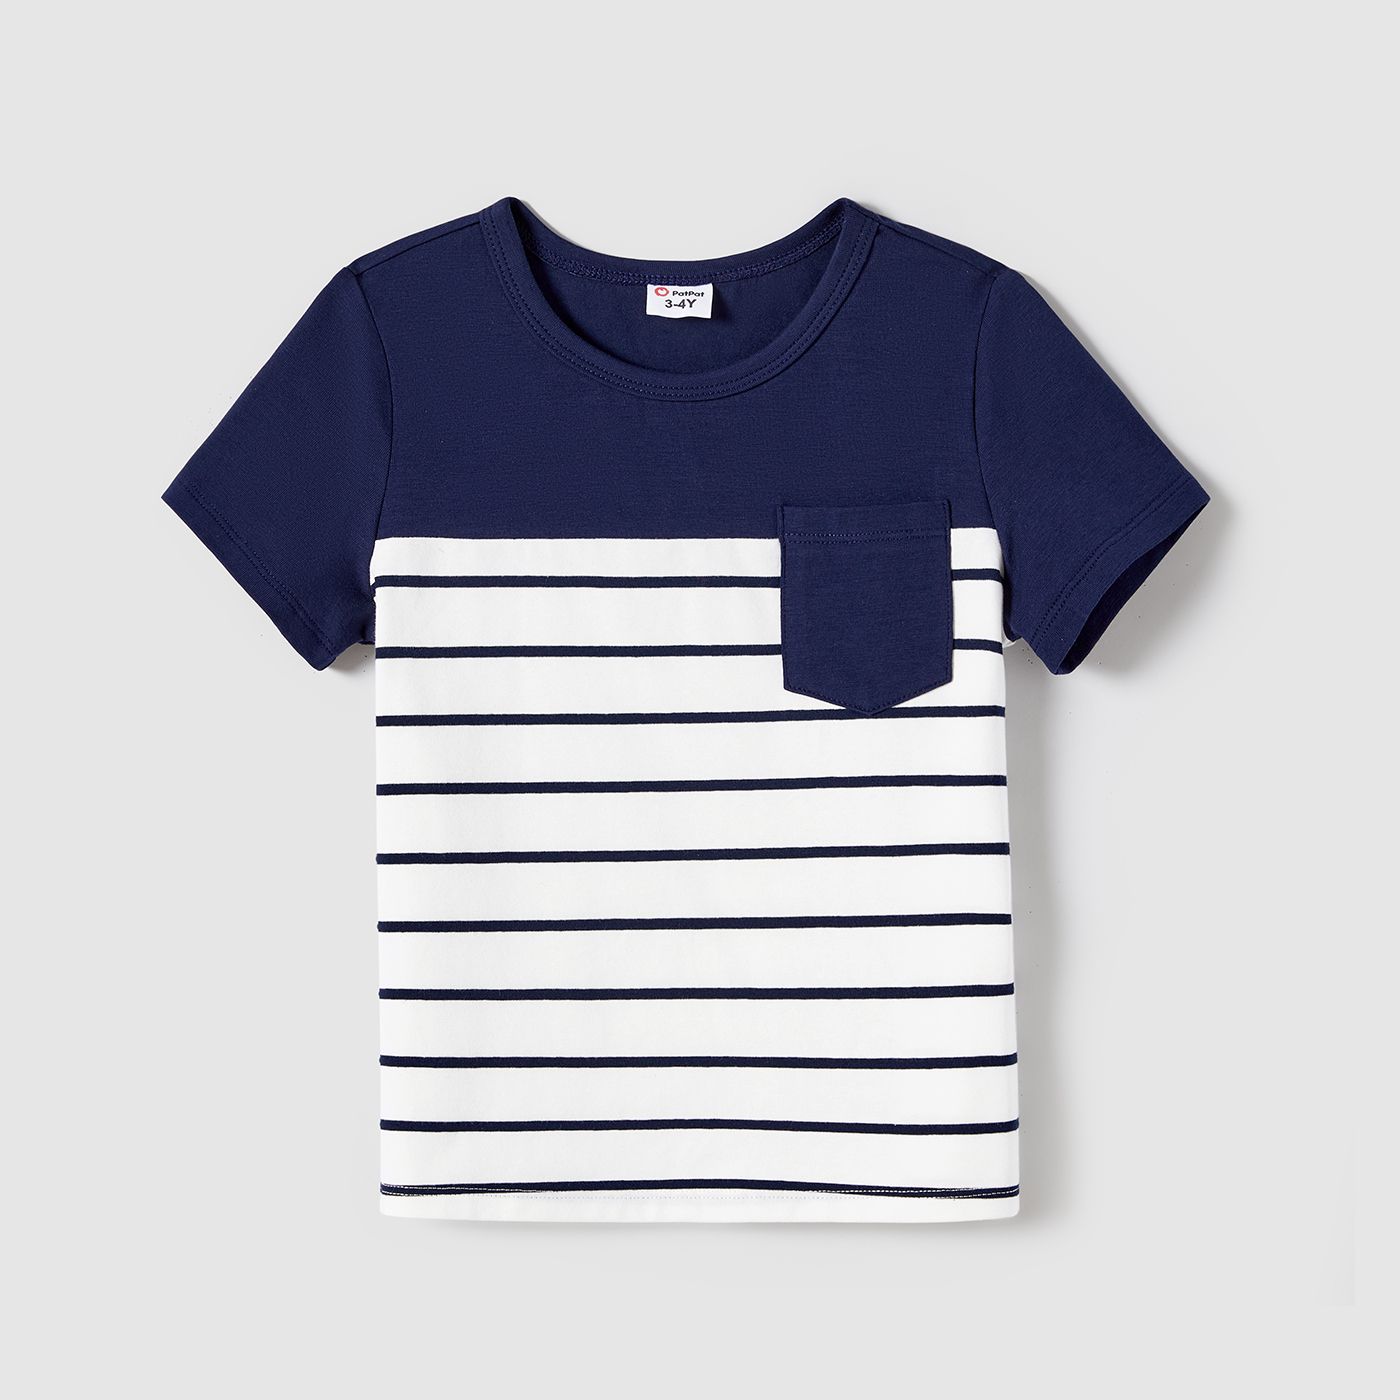 Family Matching Button Decor Tank Dresses And Striped T-shirts Sets